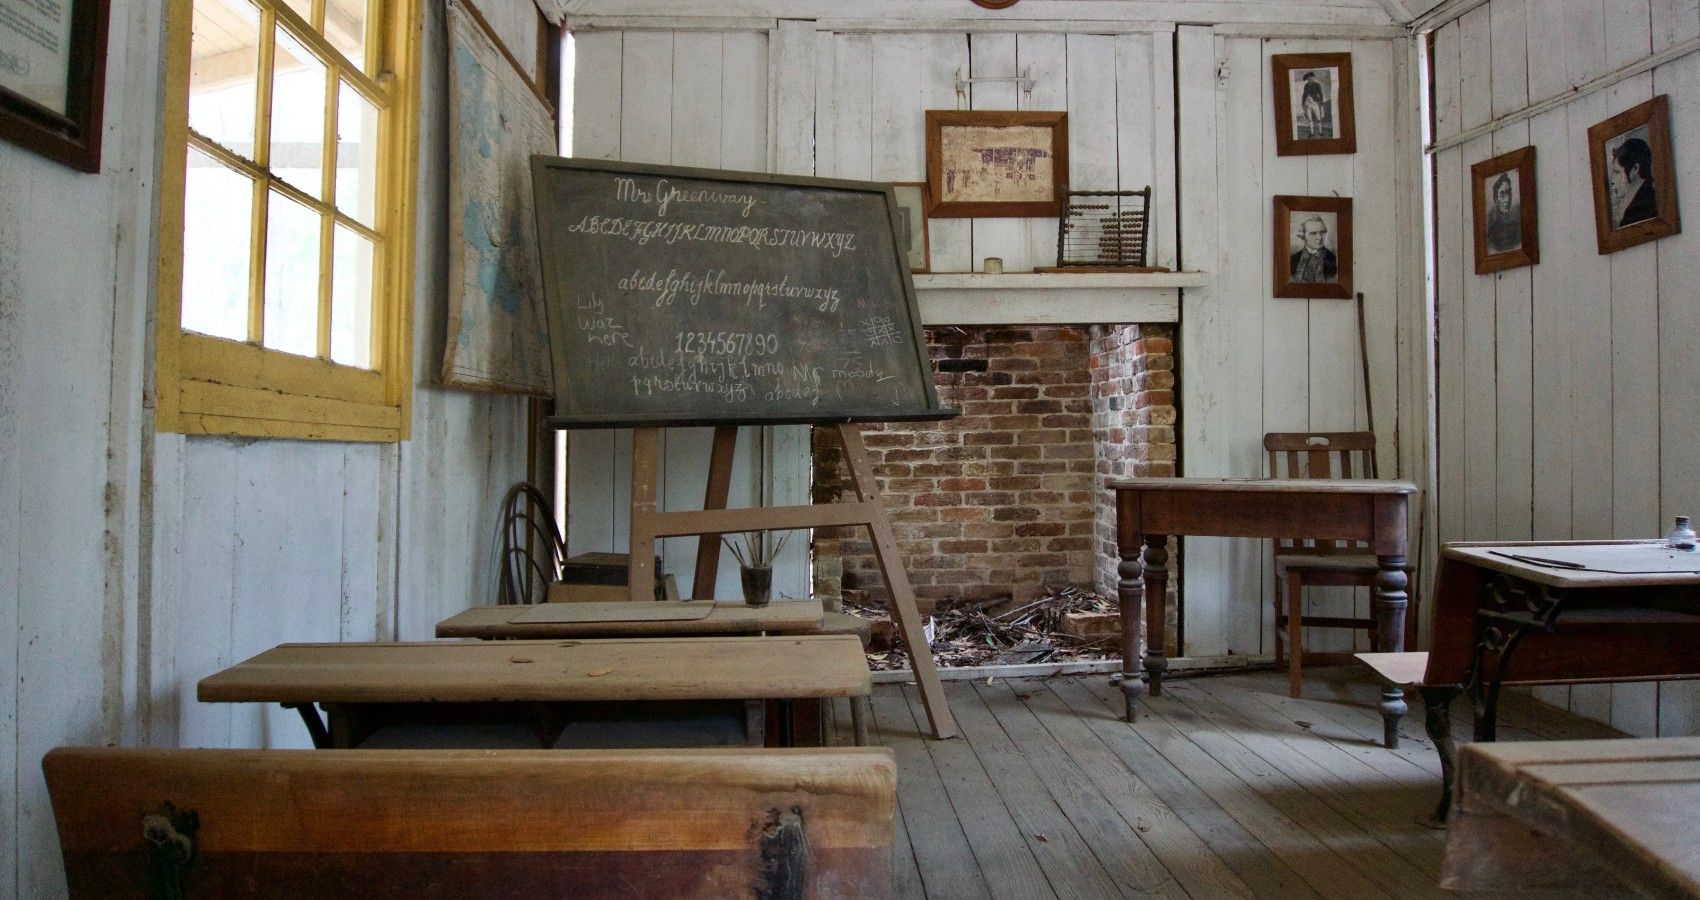 An old and abandoned school classroom